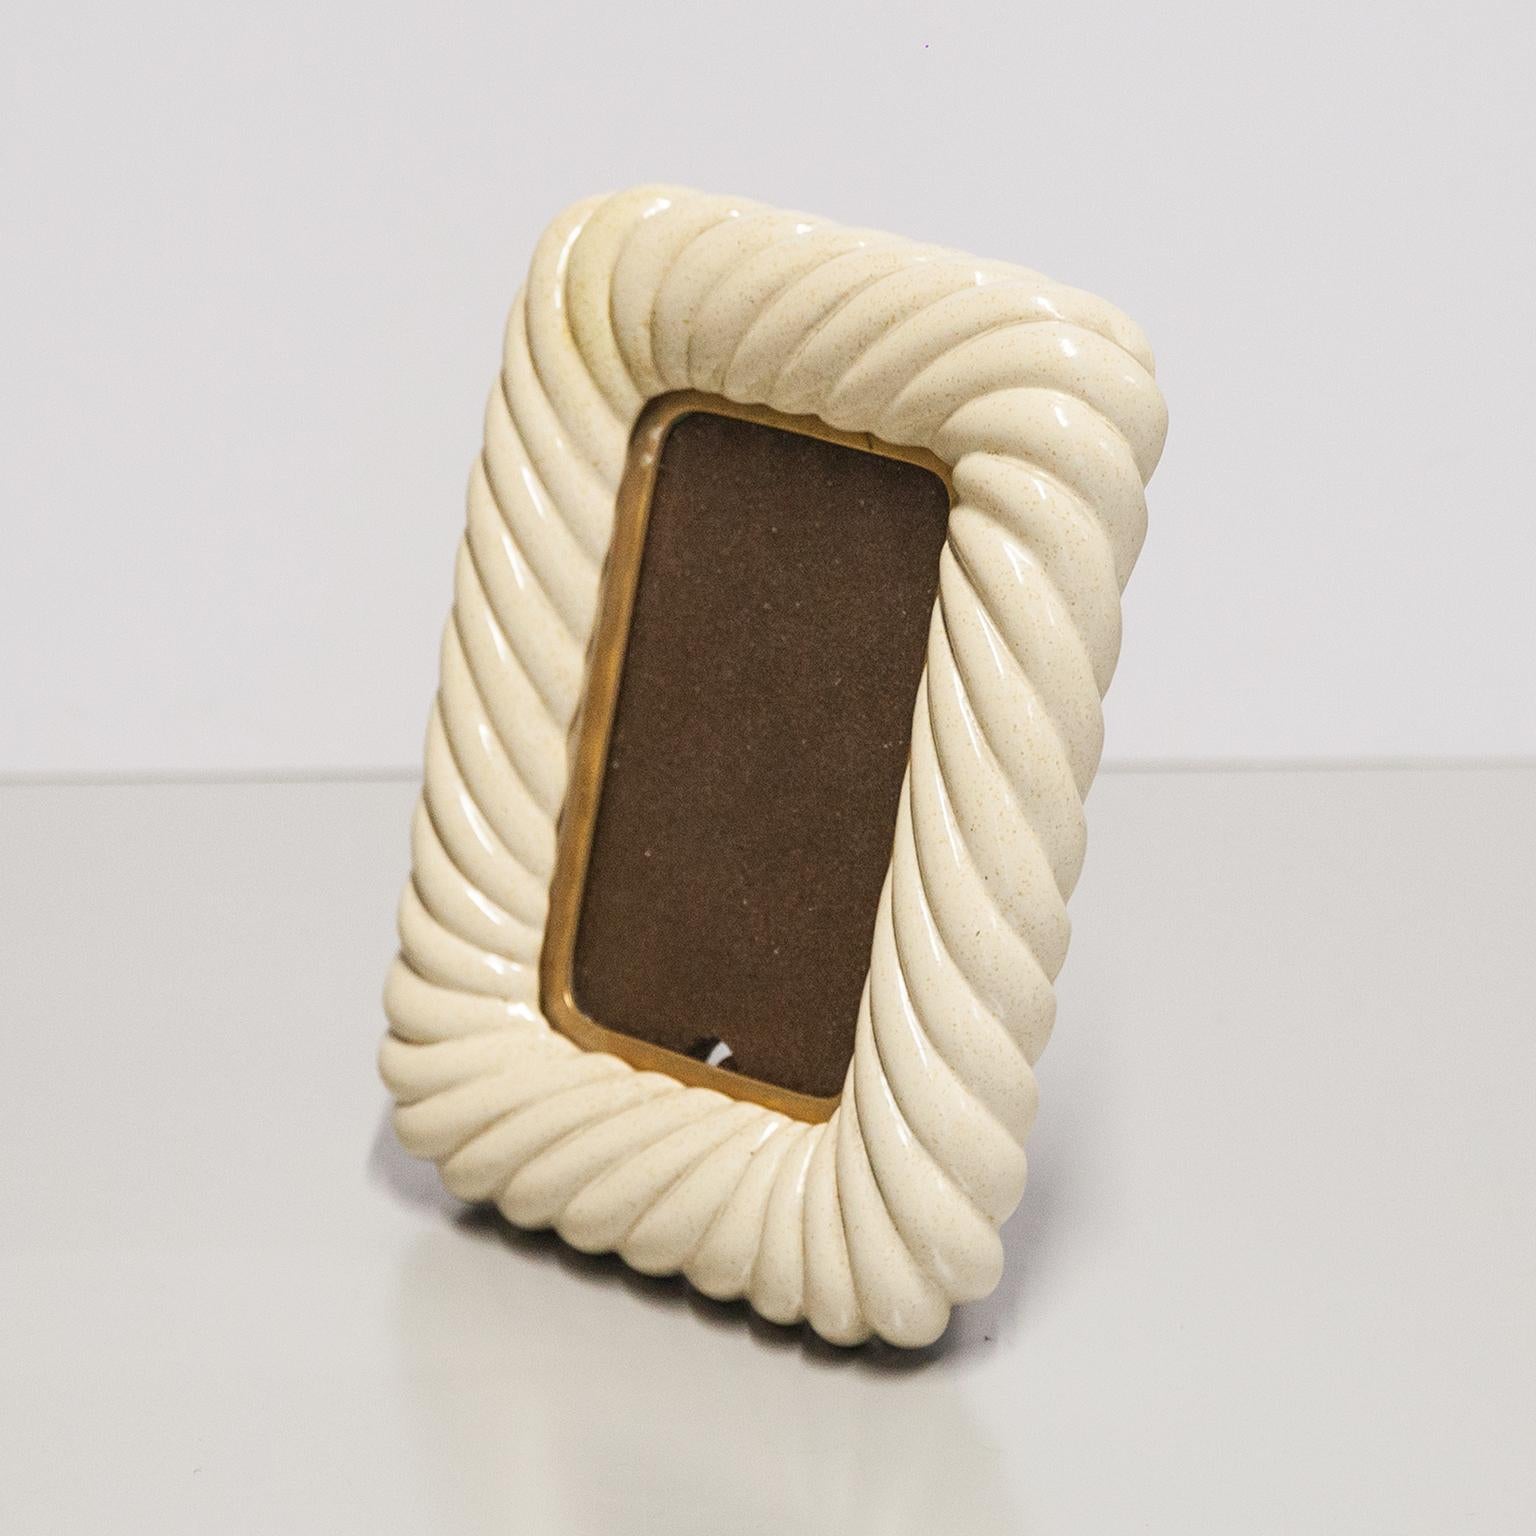 Elegant white ceramic picture frame. This fantastic piece was designed in Italy during the 1960s and it is designed by Tommaso Barbi.
This item is breathtaking to the amazing glossy ceramic and the floral reminiscence in its structure, with lovely